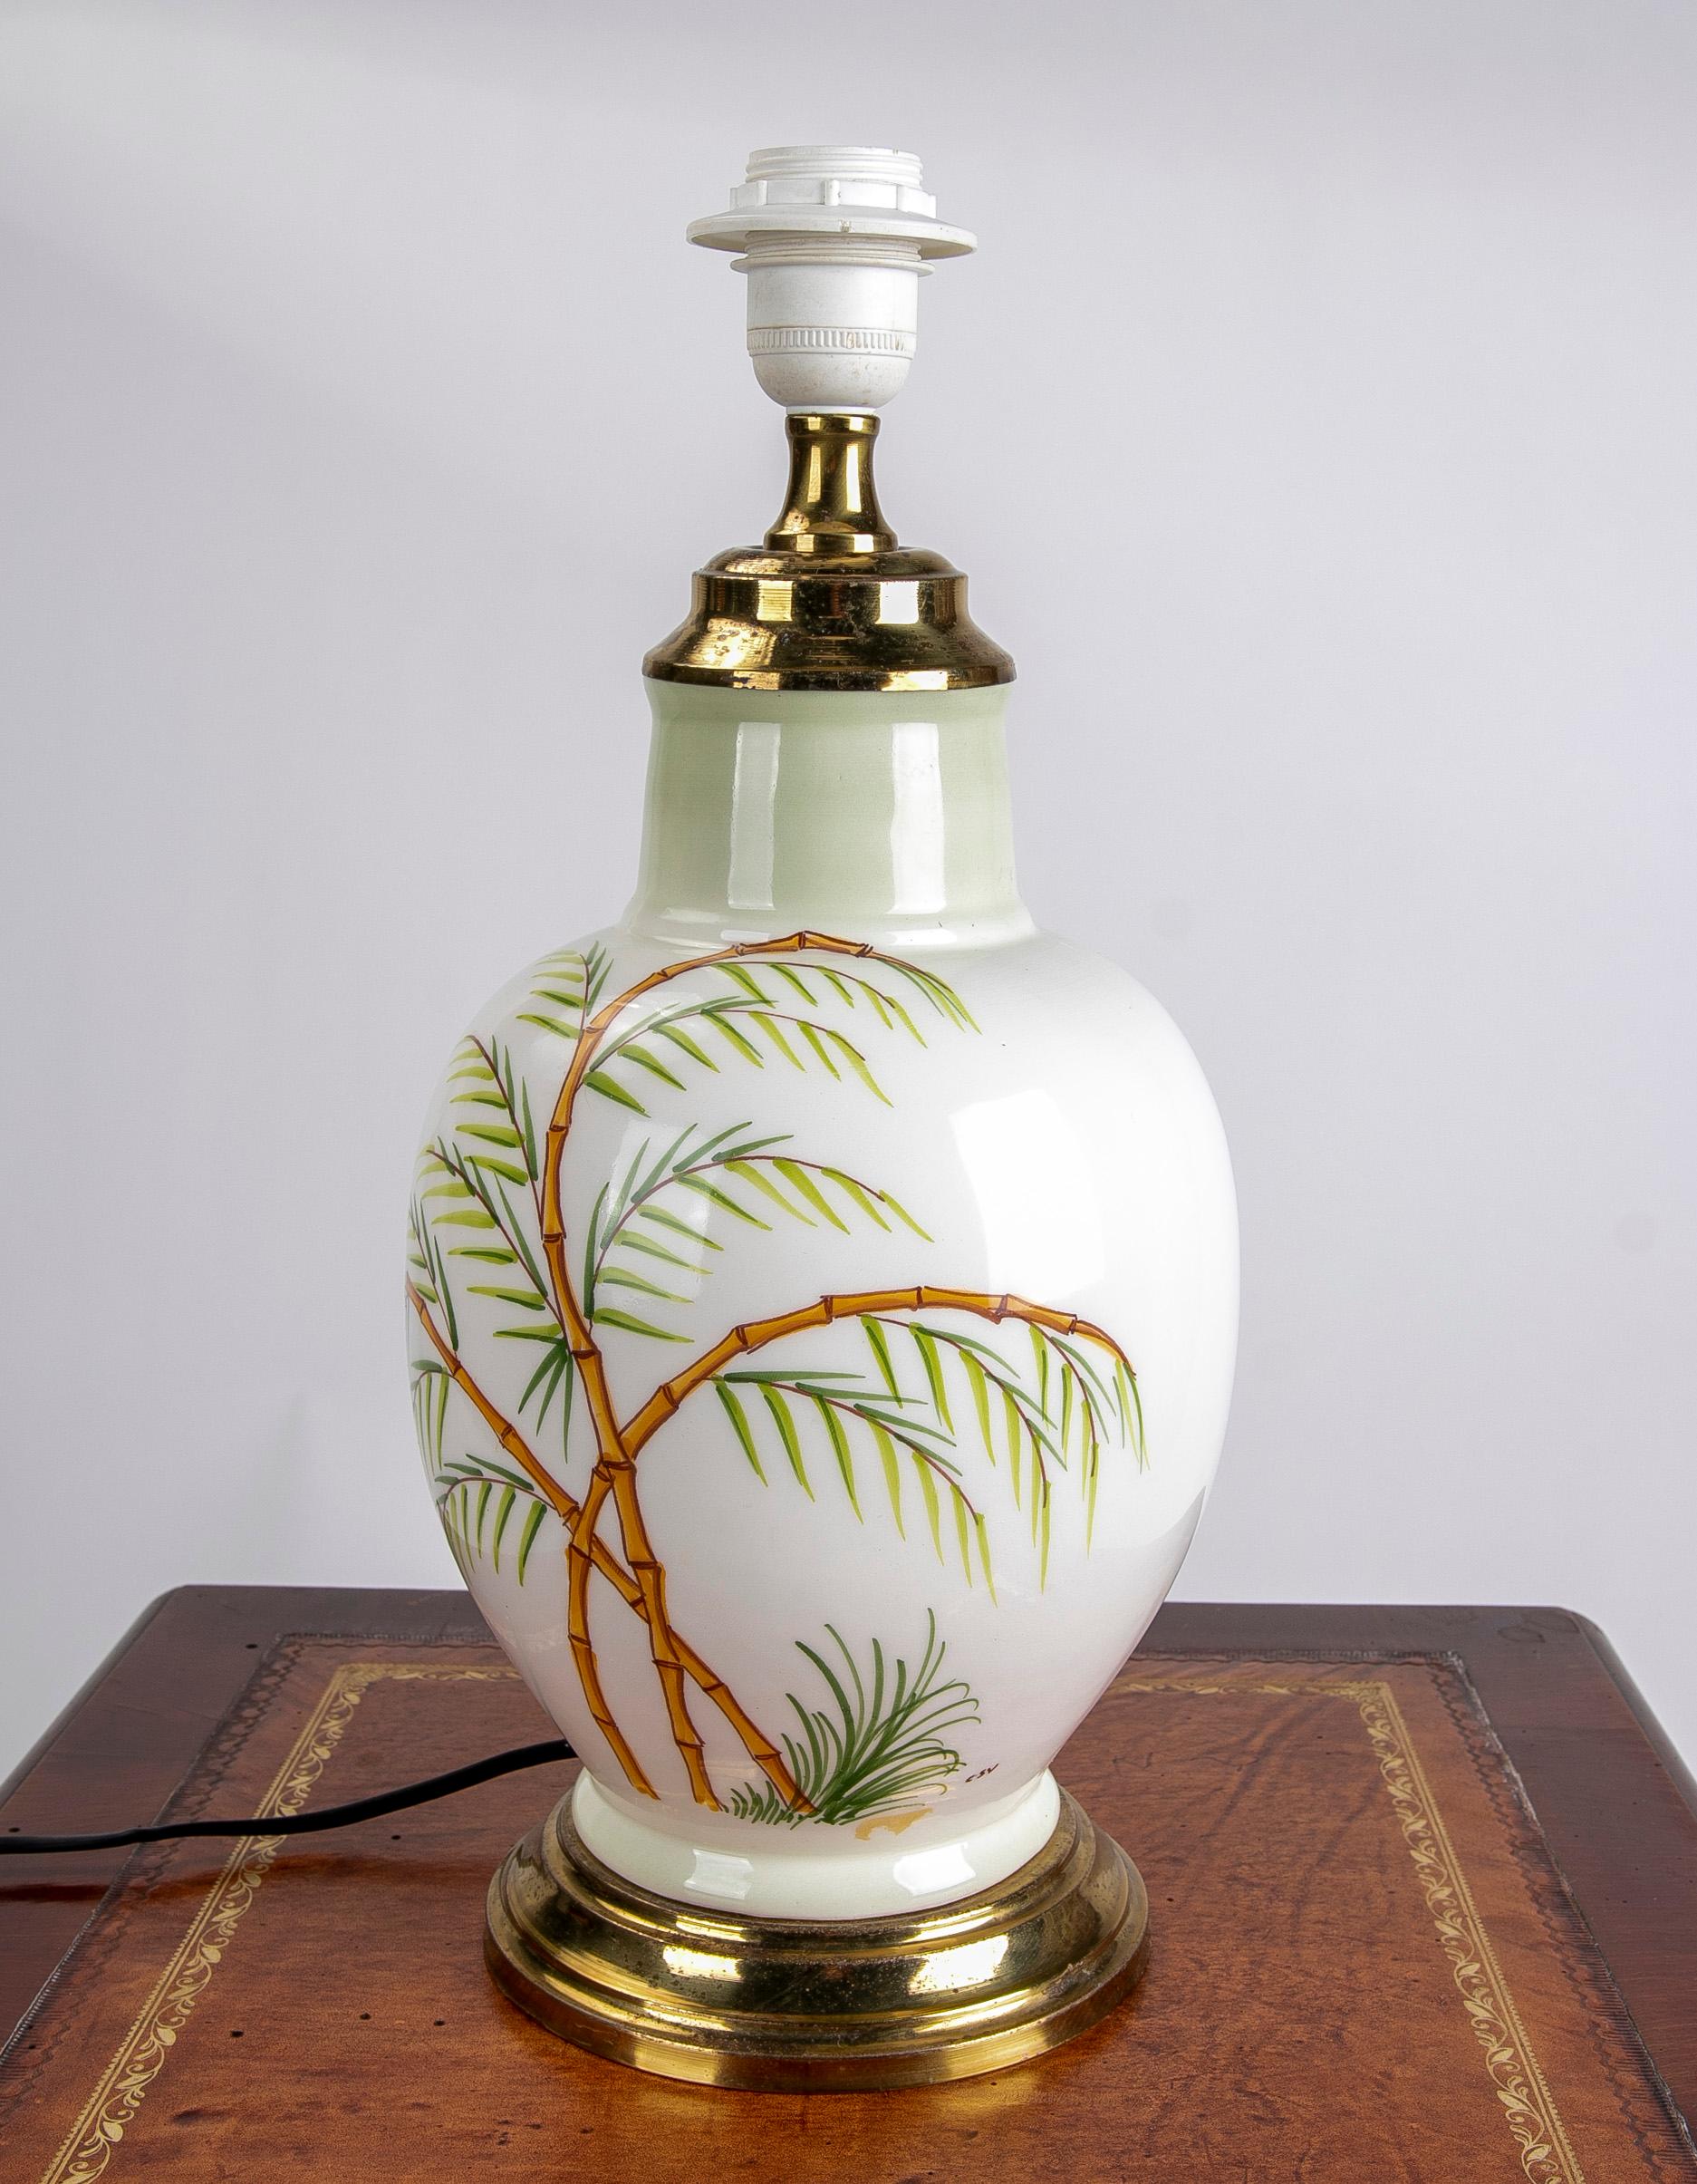 1980s Spanish Ceramic lamp with hand-painted palm trees.